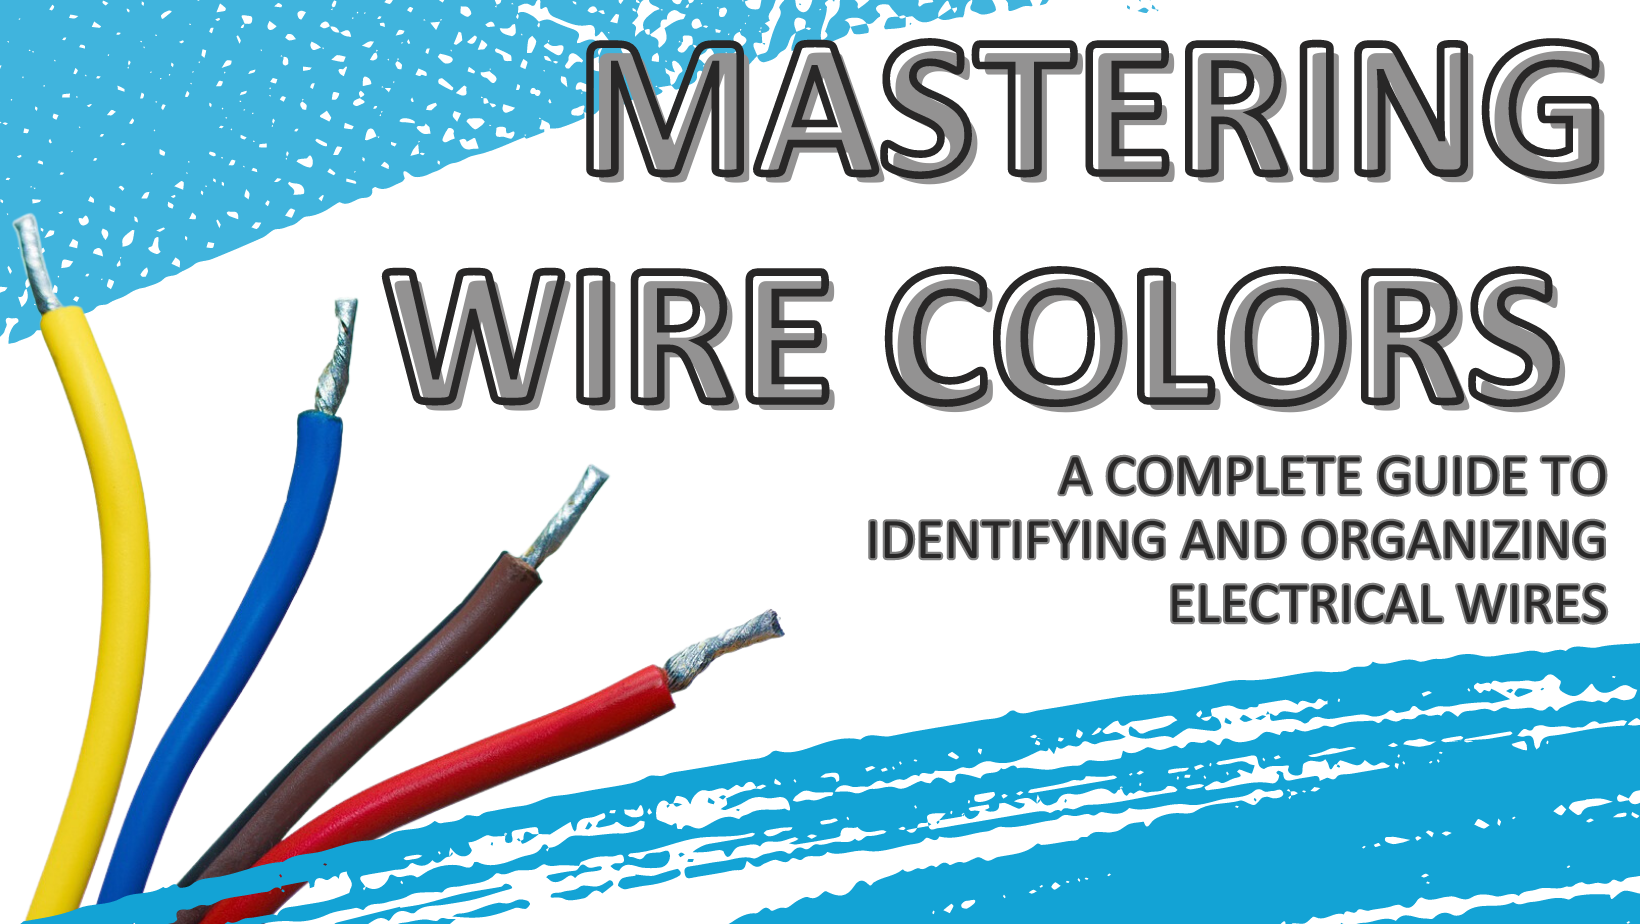 Mastering Wire Colors: A Complete Guide to Identifying and Organizing Electrical Wires